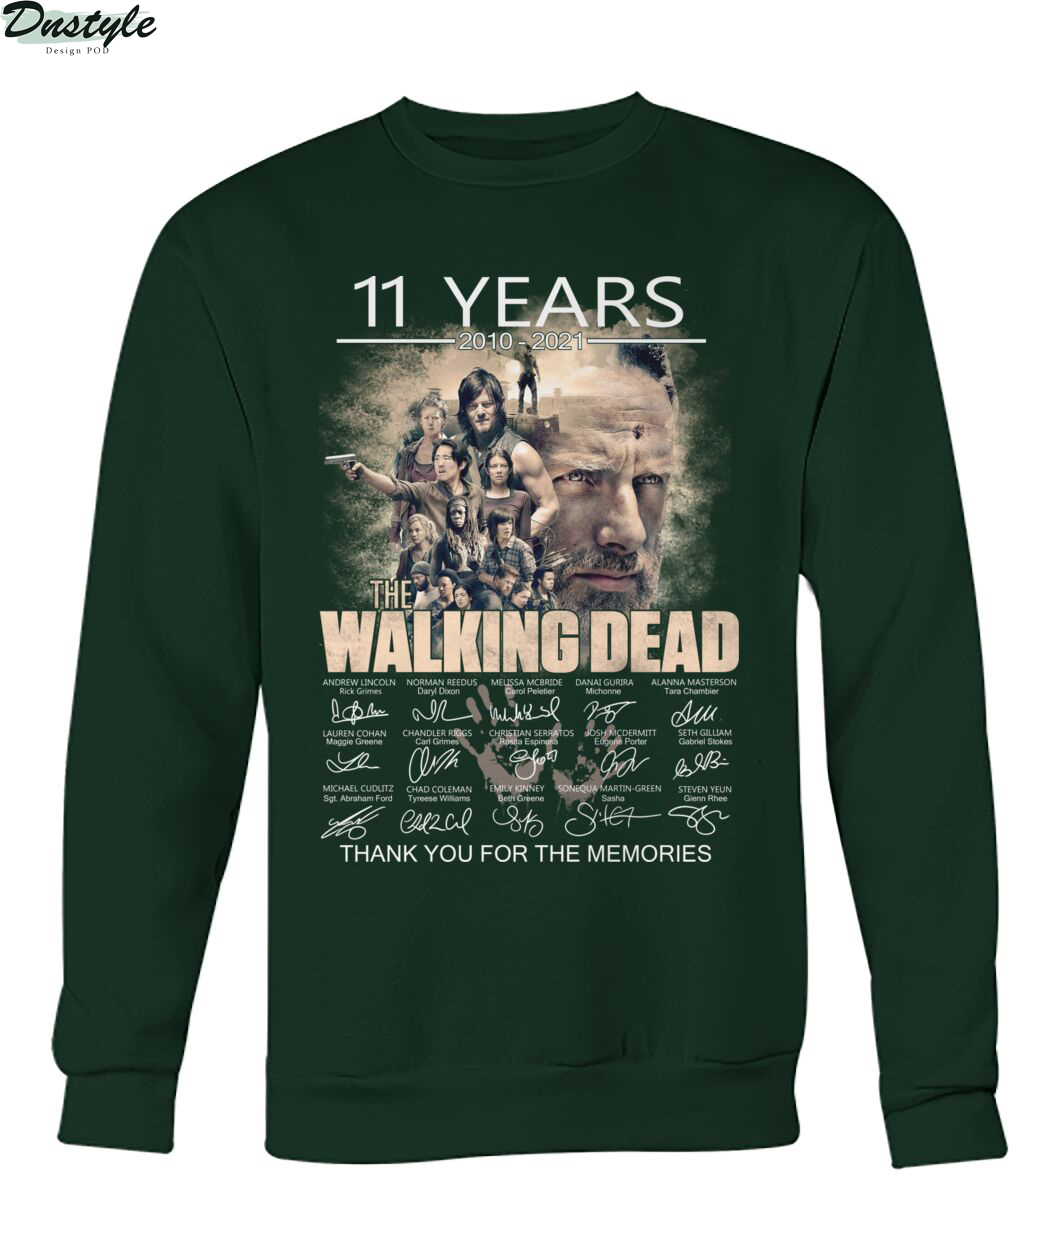 The walking dead 11 years 2010-2021 thank you for the memories sweatshirt